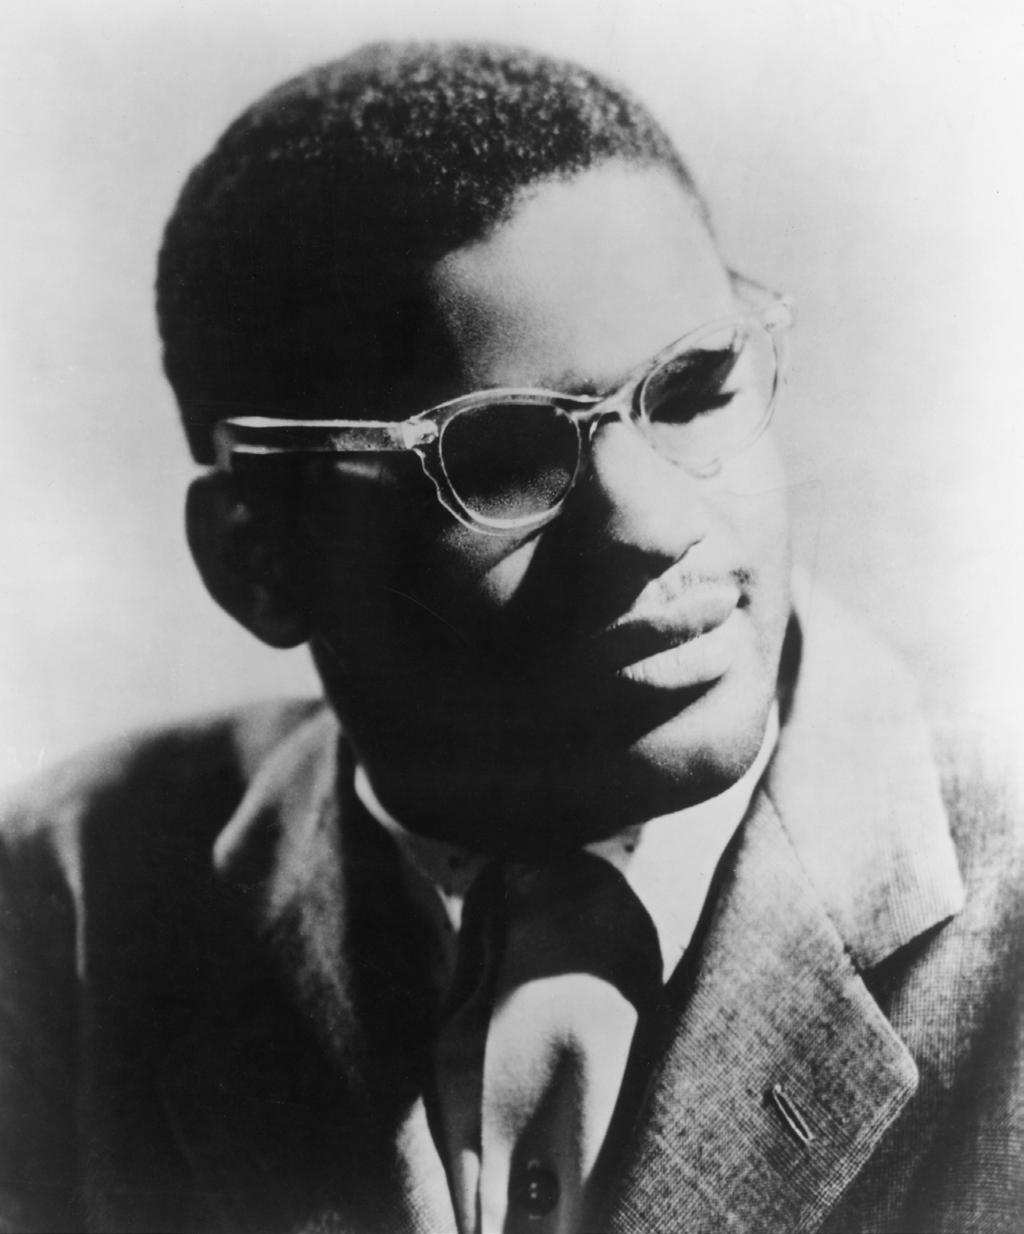 Introduction: The Soul State of Florida 3 Ray Charles circa 1949, just after he left his home state of Florida. Courtesy Joel Dufour.